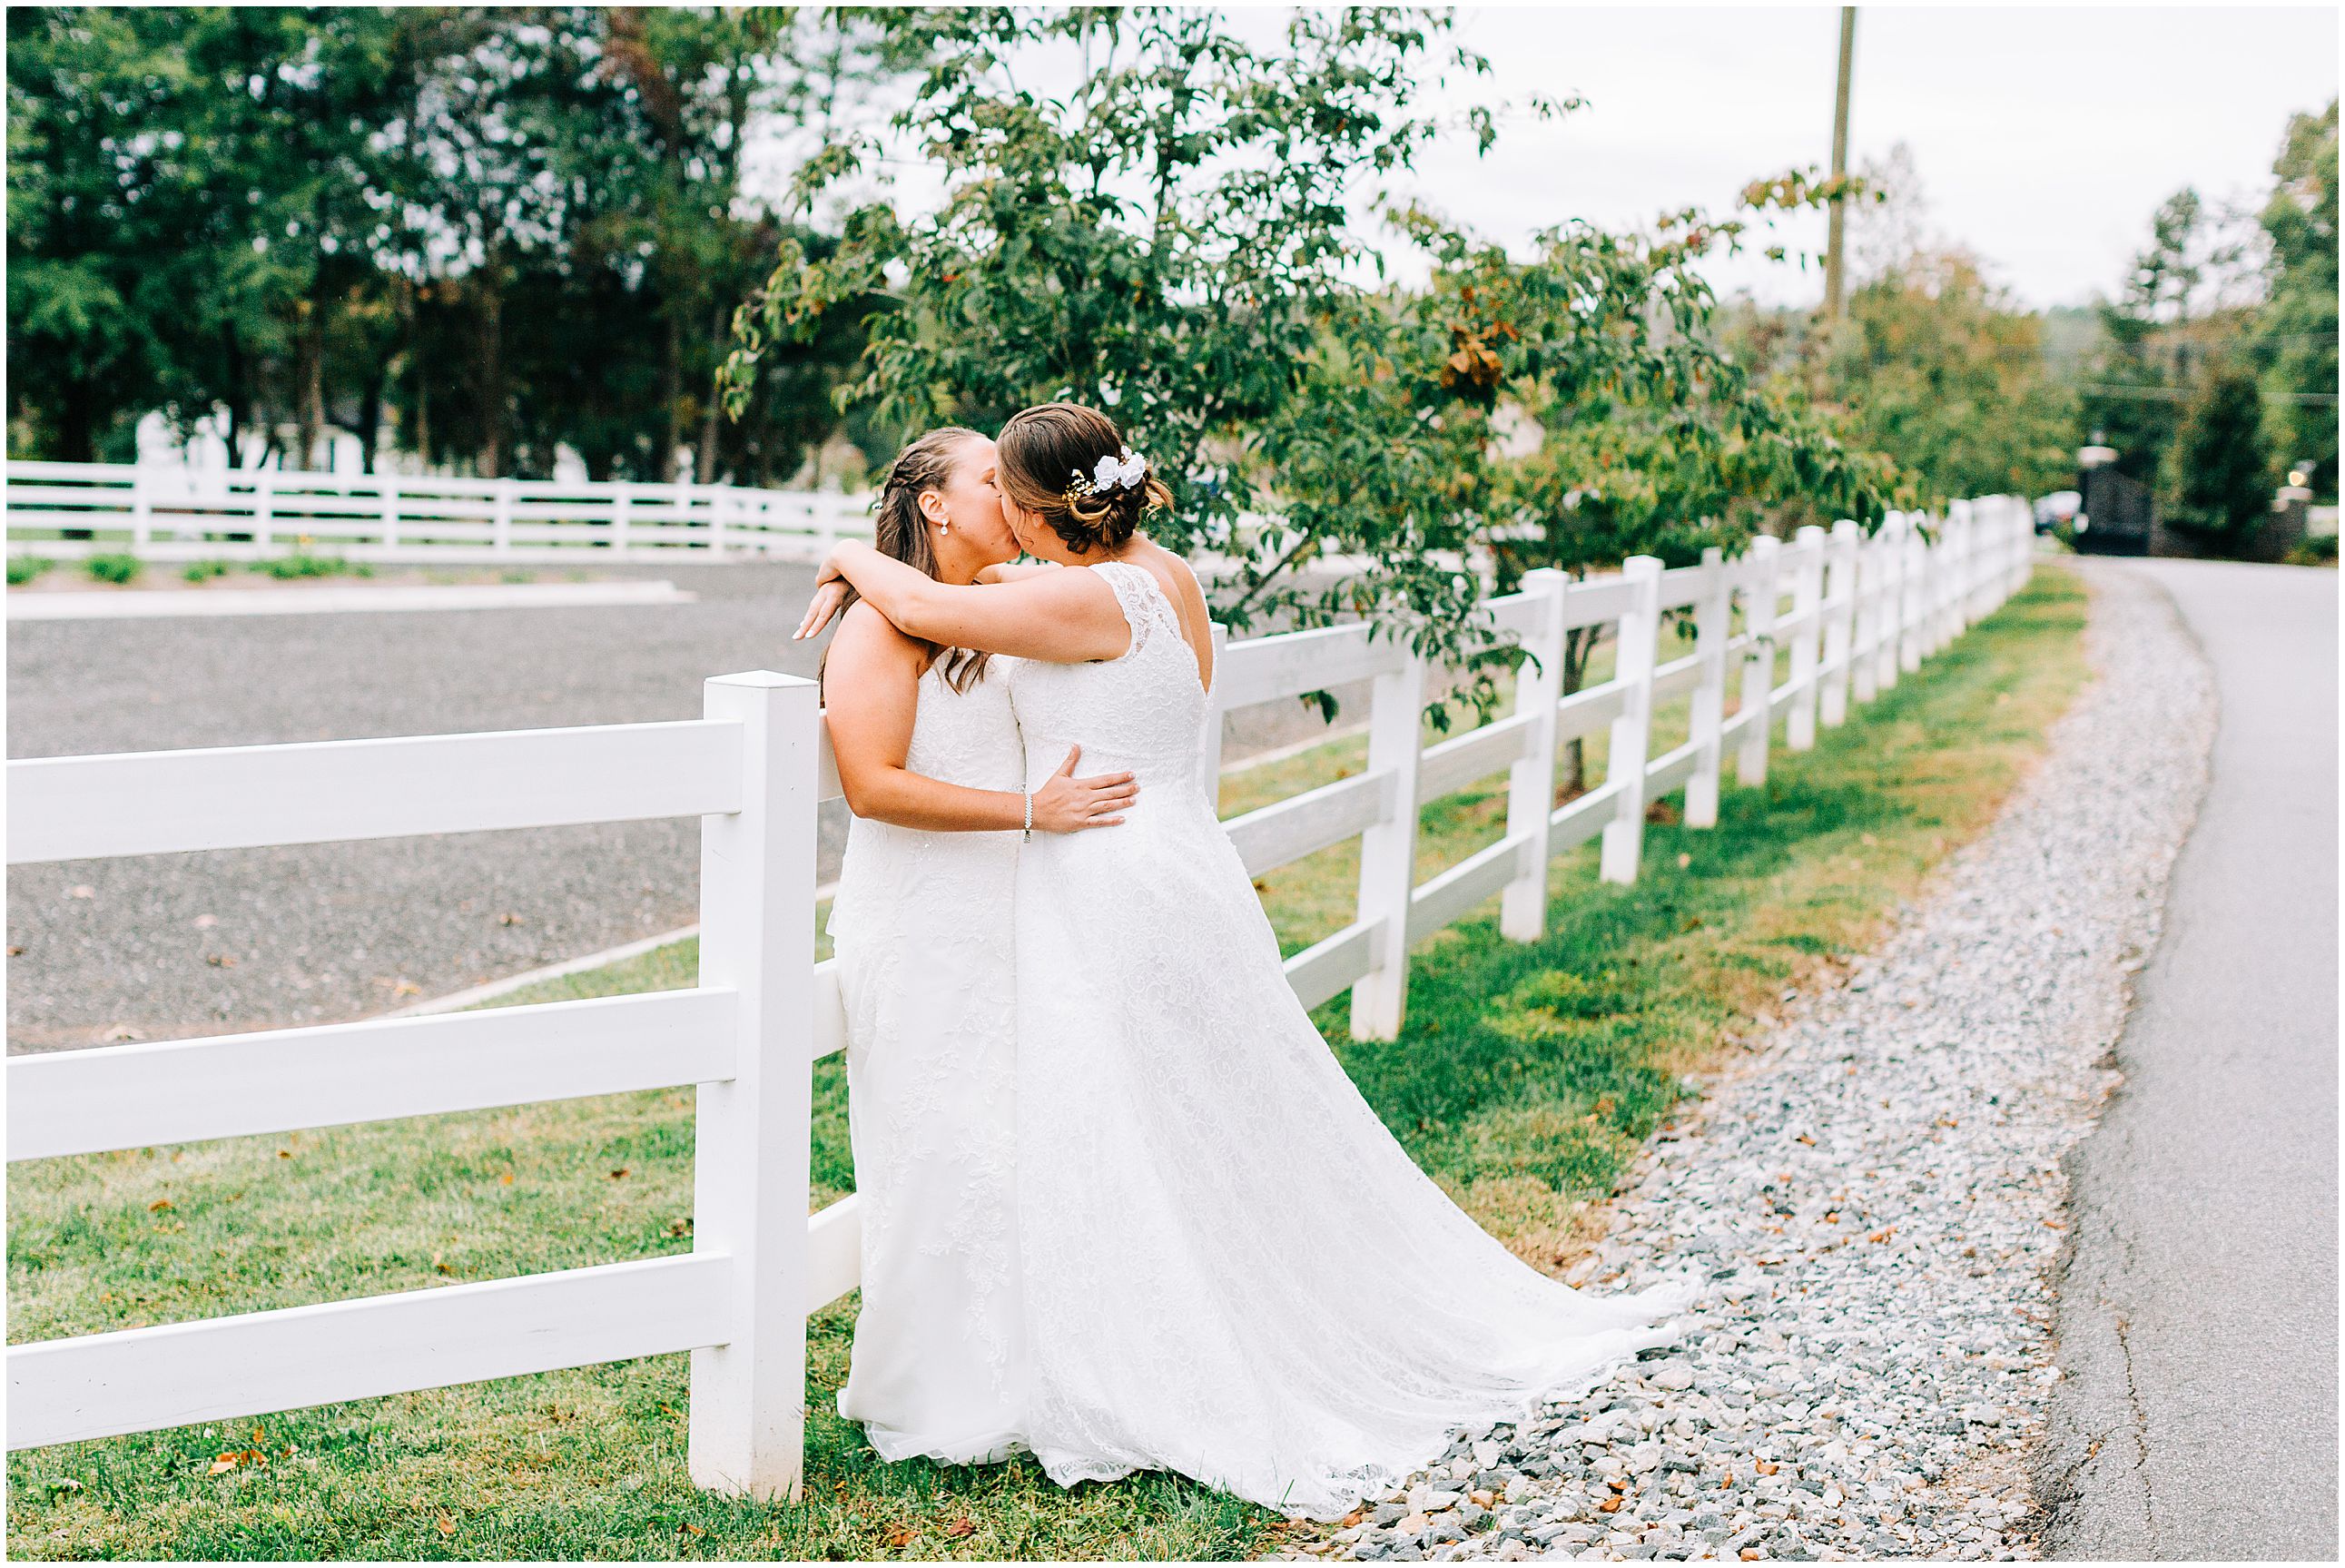 Wedding at Legacy Stables and Events in Winston-Salem